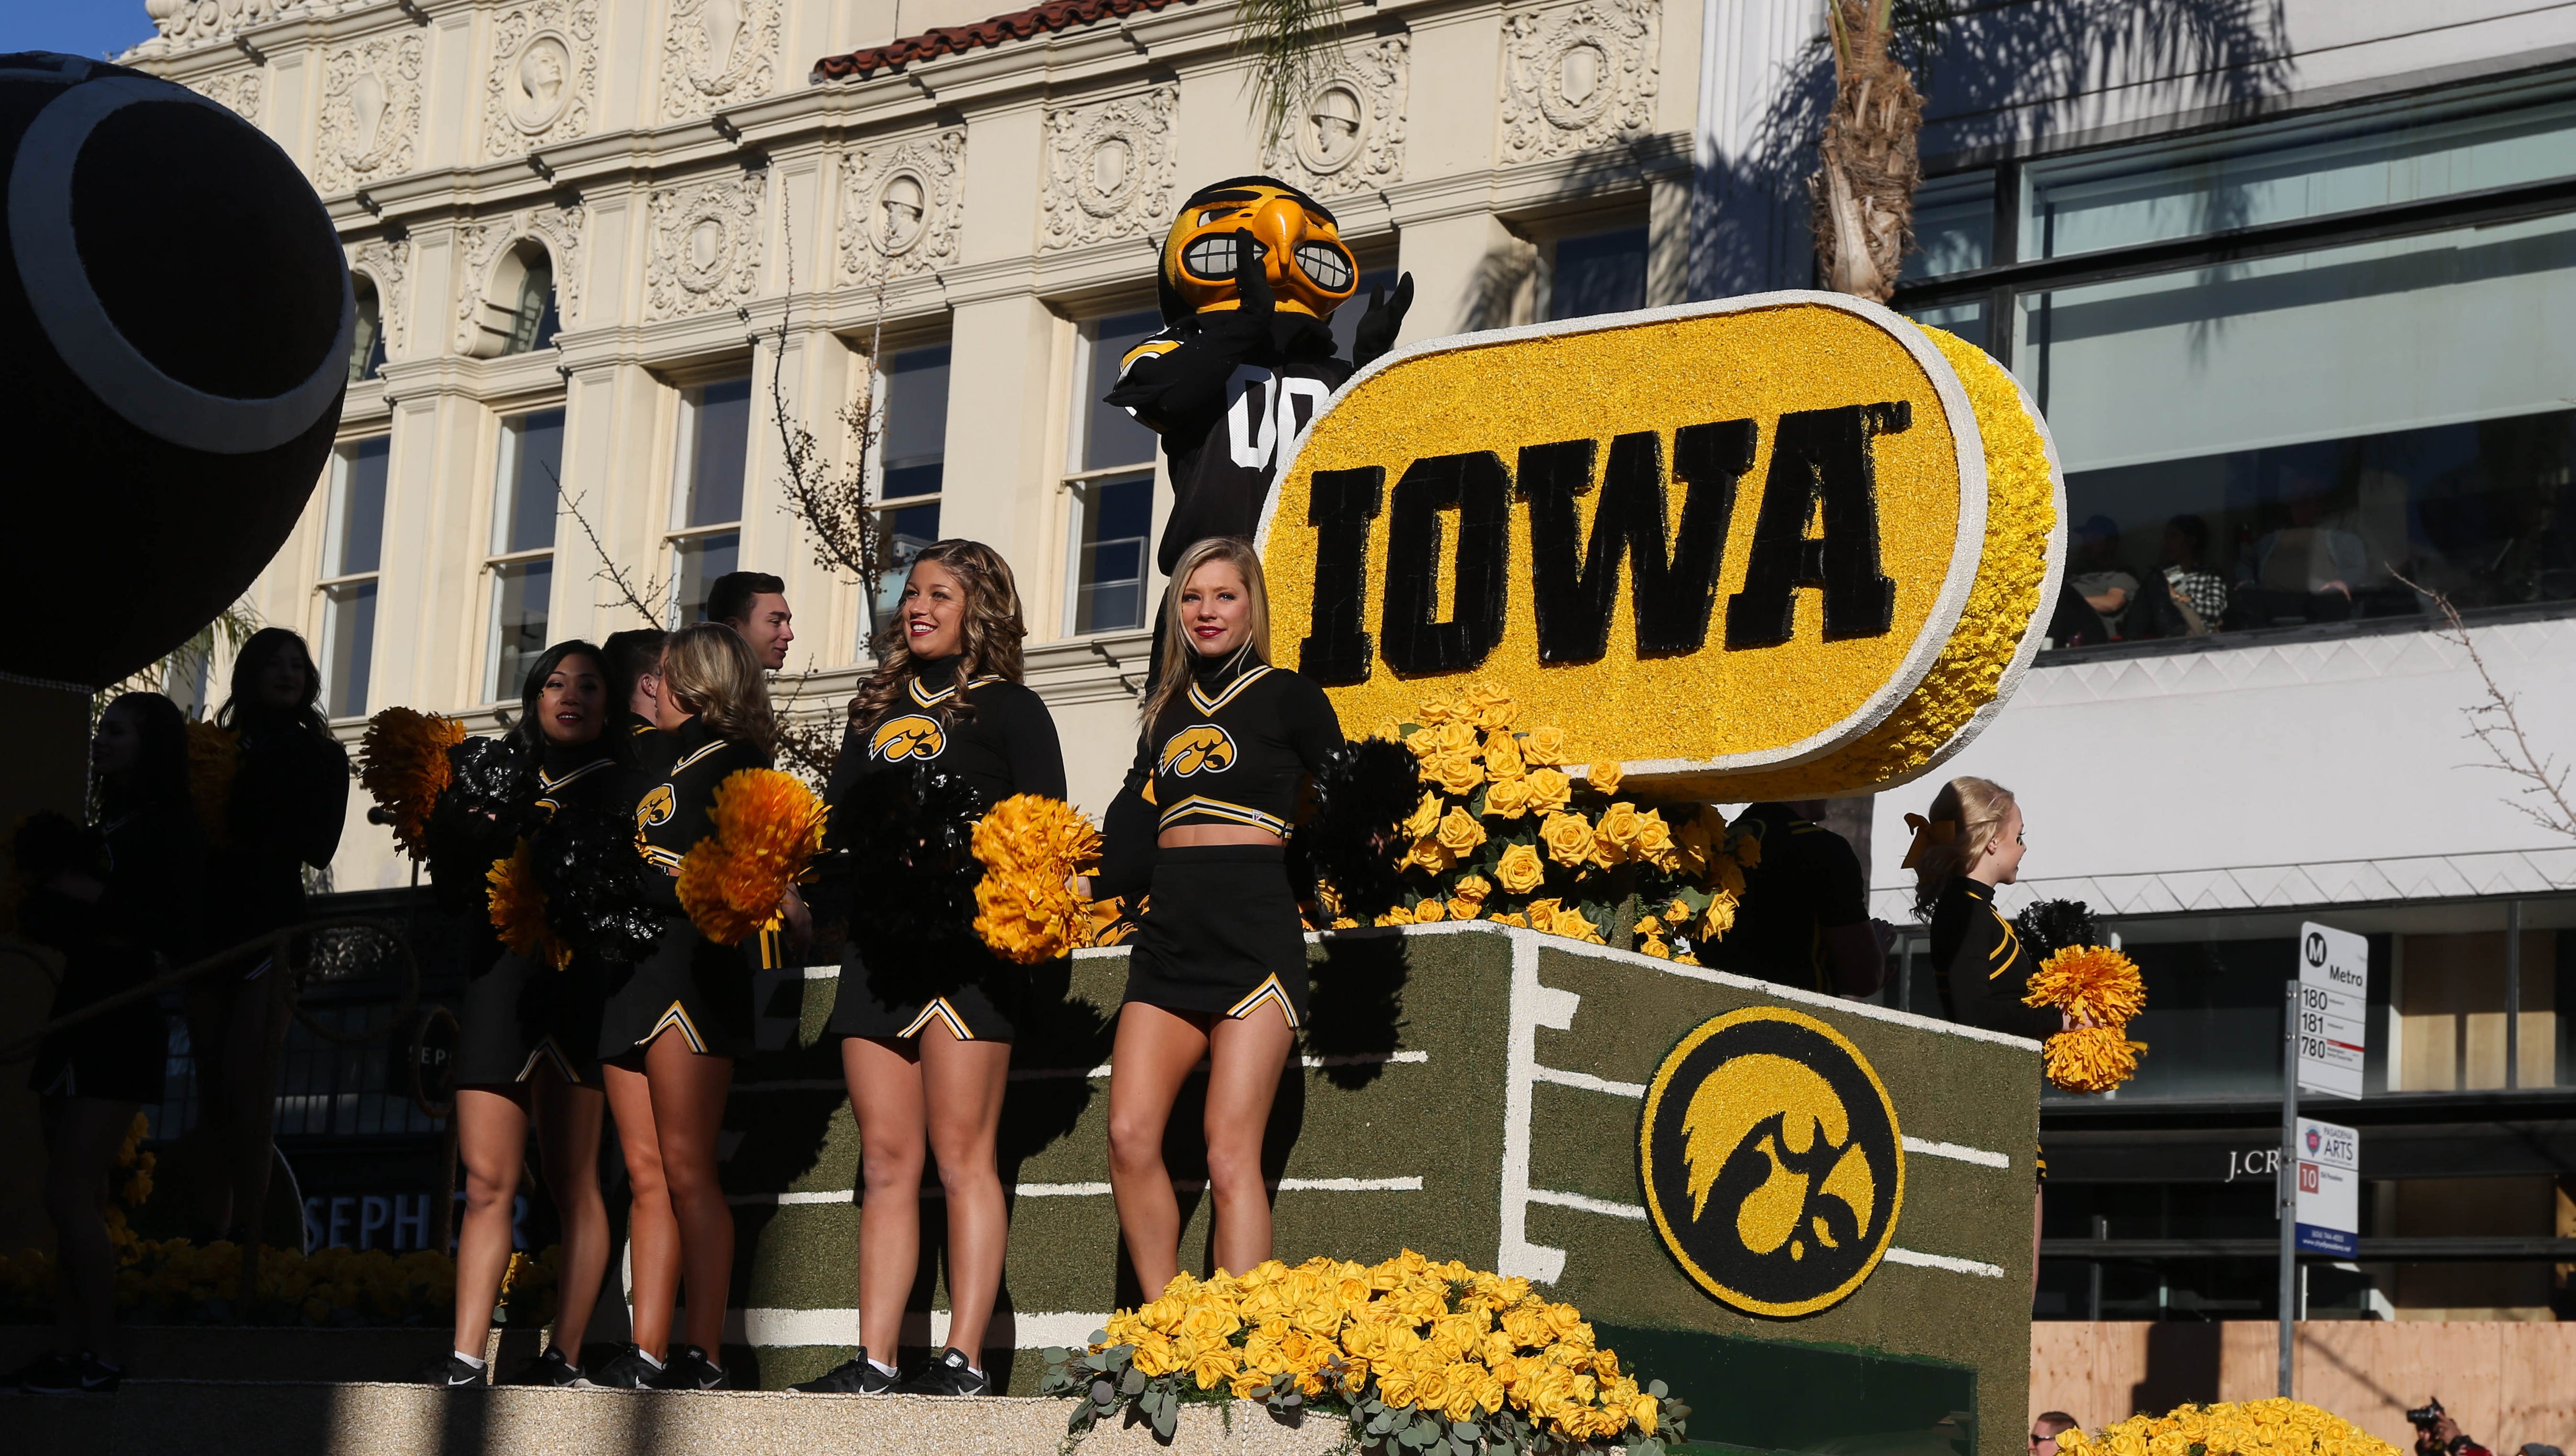 Members of the University of Iowa Spirit Squad greet Hawkeye supporters lined up along Colorado Blvd. on Friday, Jan. 1, 2016, during the 2016 Tournament of Roses Parade in Pasadena, Calif.